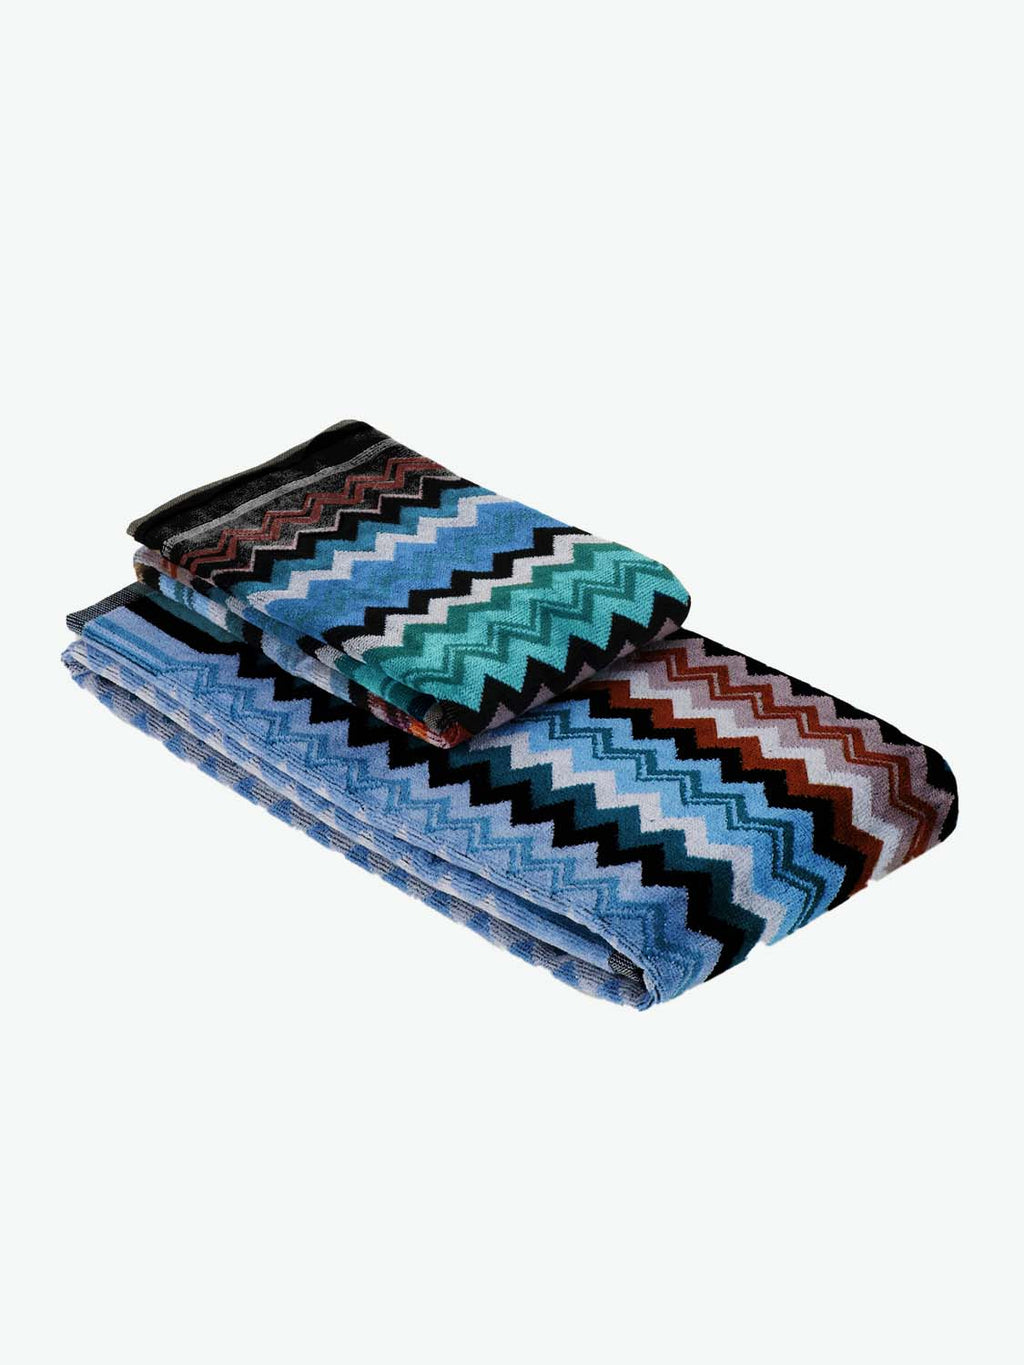 Missoni Home Neoclassic Two Piece Bath and Hand Towel Set